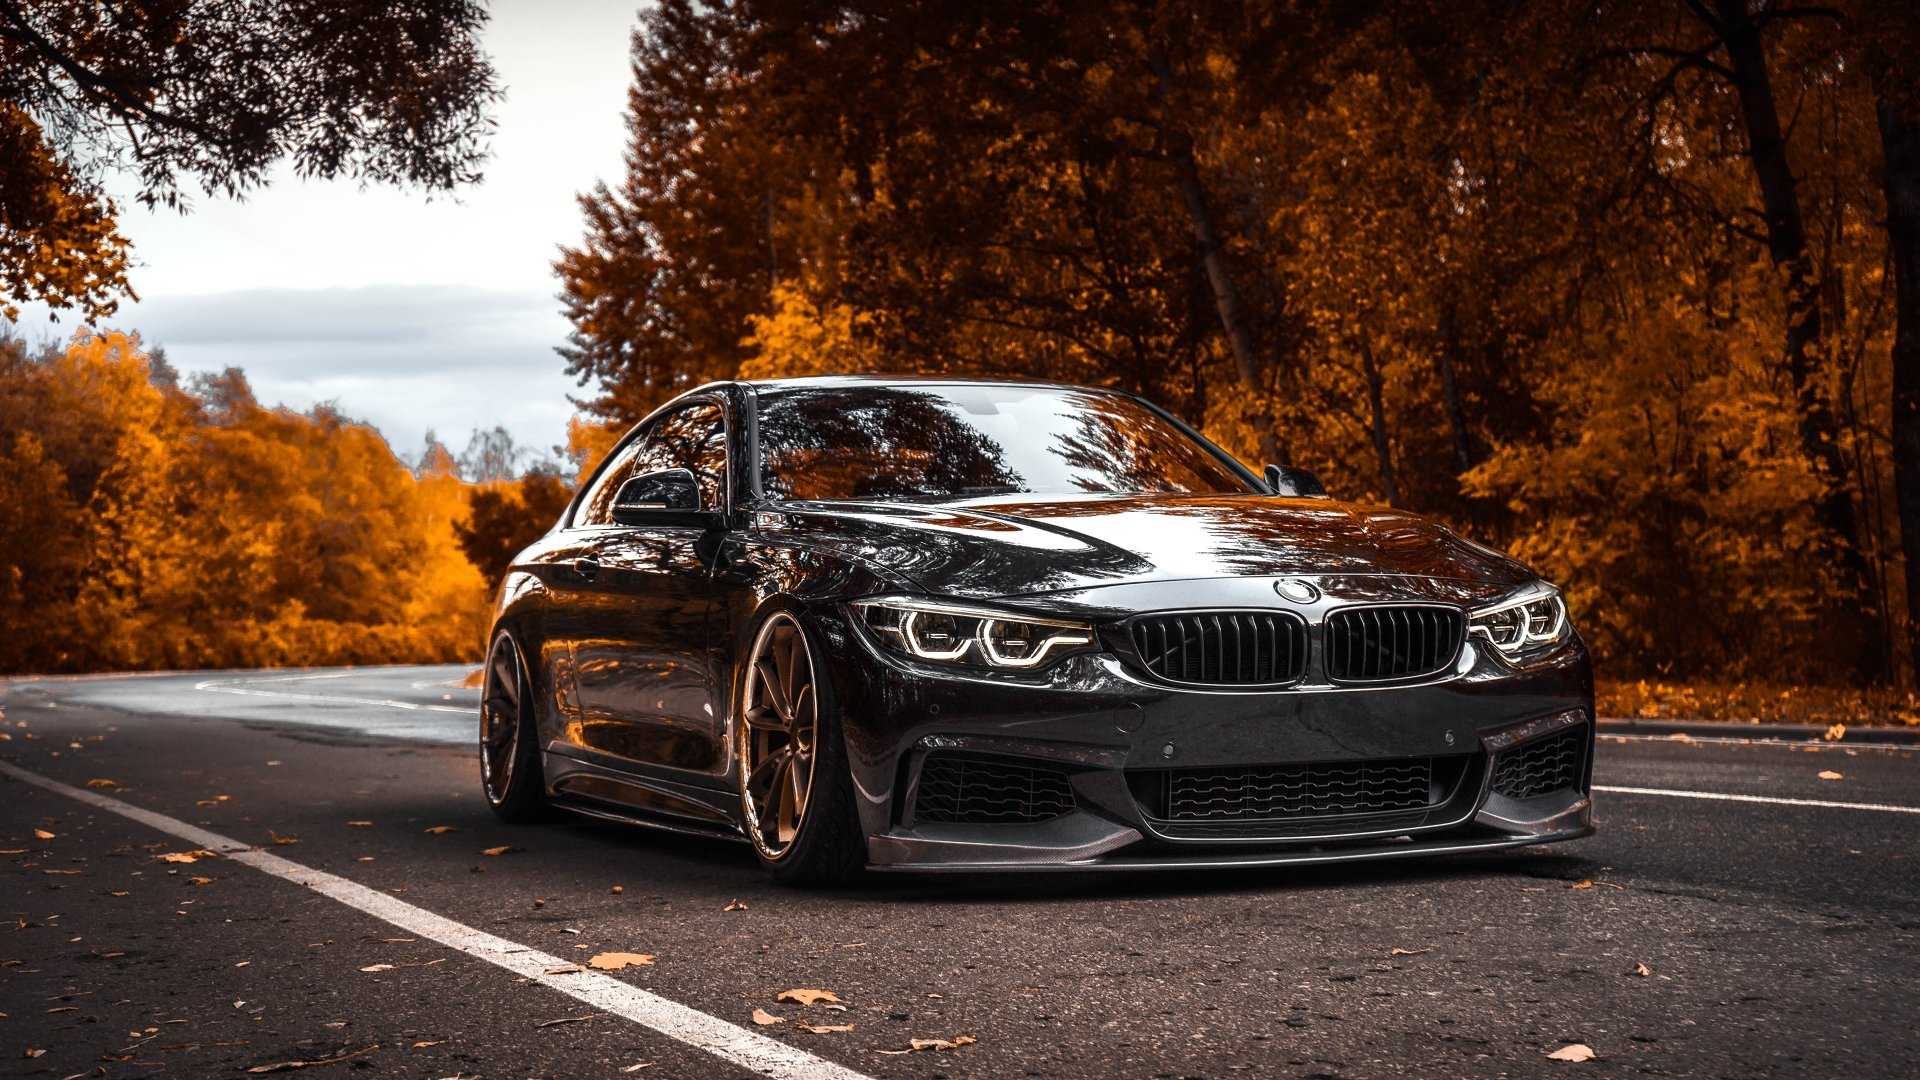 BMW Android Wallpaper